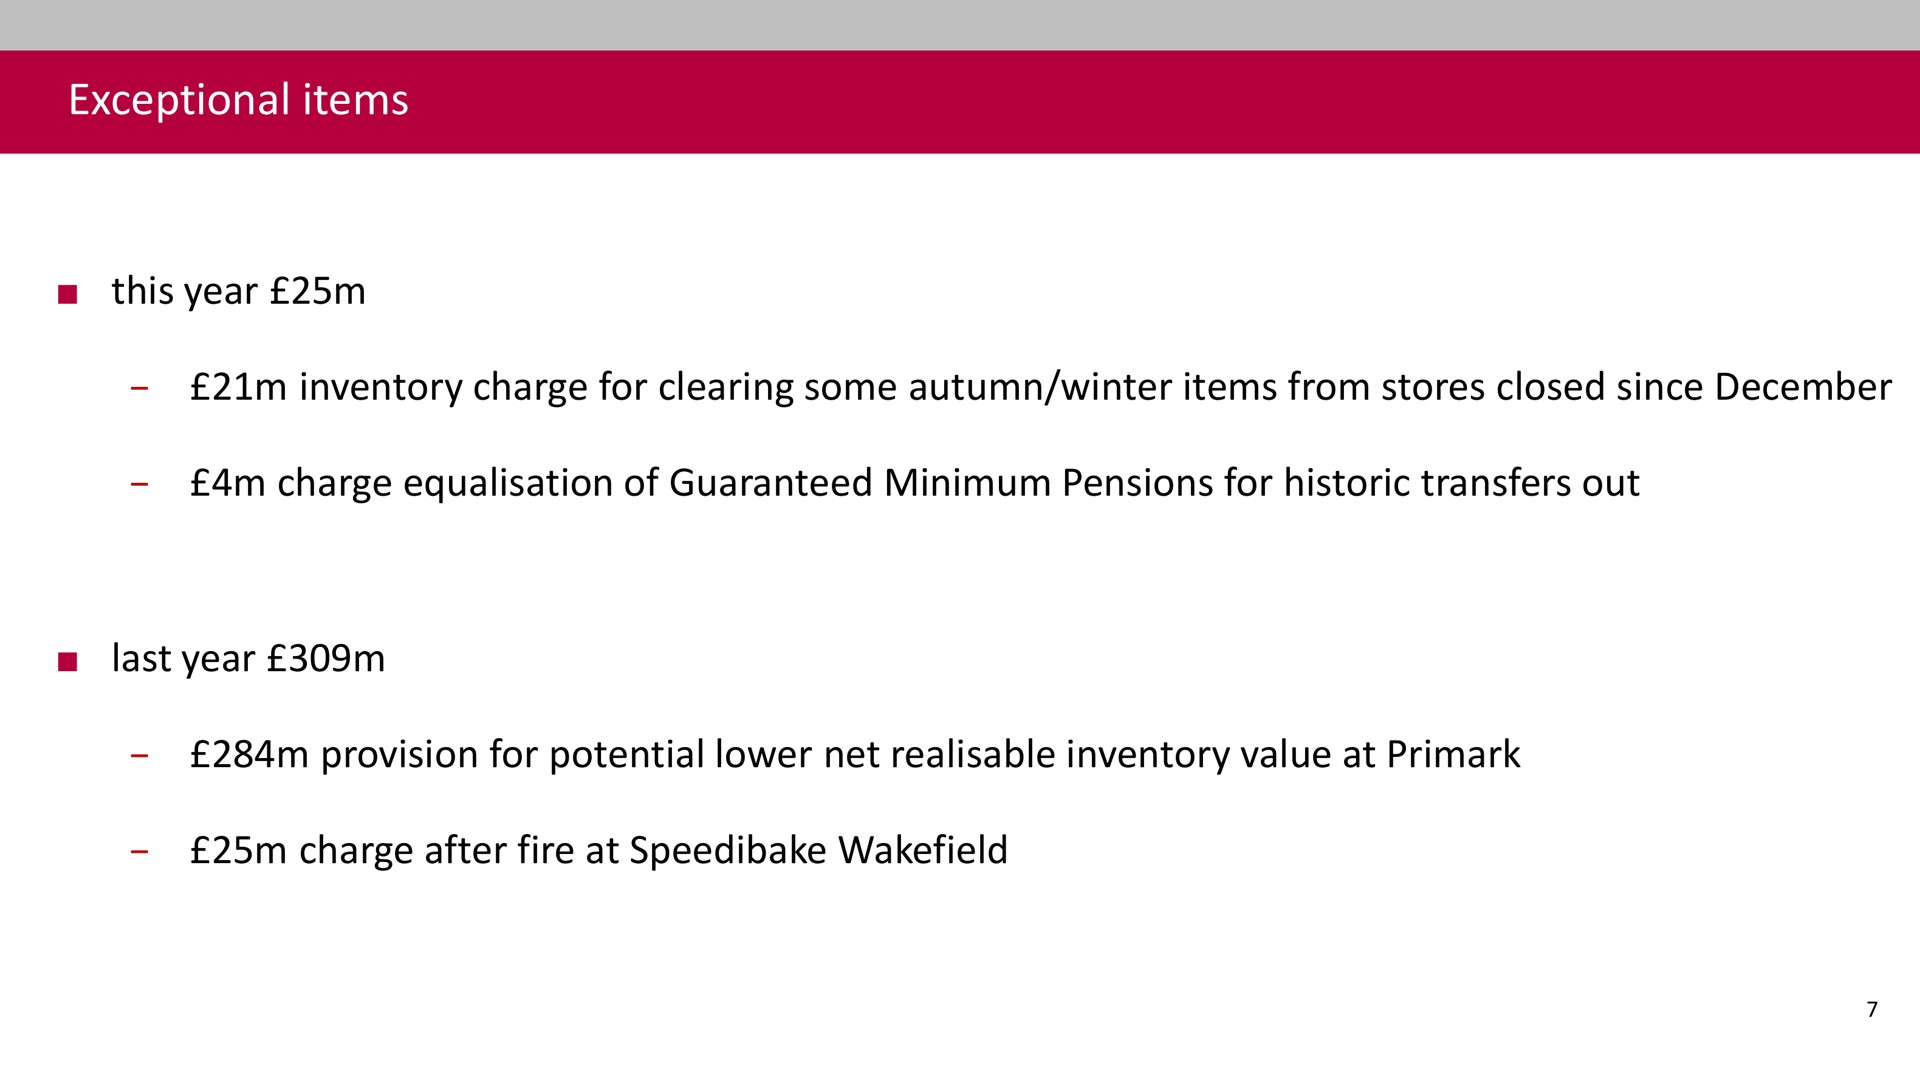 exceptional items this year inventory charge for clearing some autumn winter items from stores closed since charge of guaranteed minimum pensions for historic transfers out last year provision for potential lower net inventory value at charge after fire at | Associated British Foods